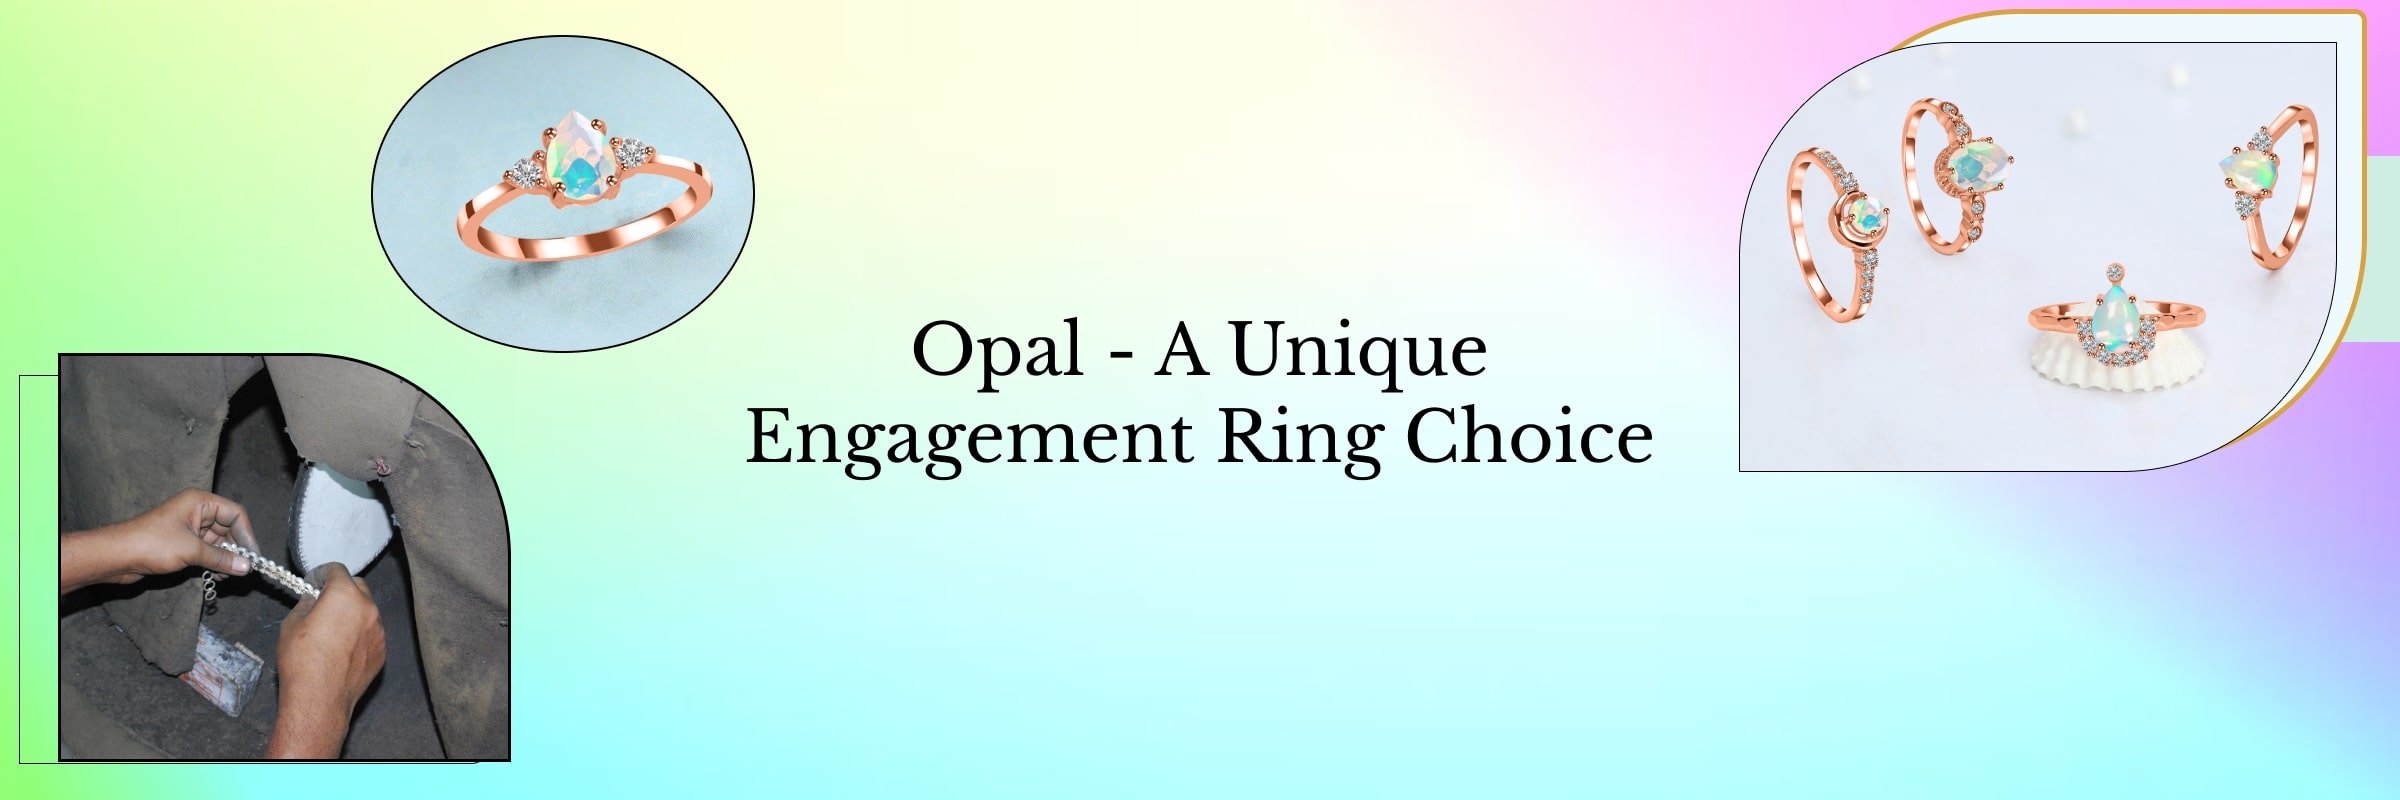 Using Opal in an Engagement Ring